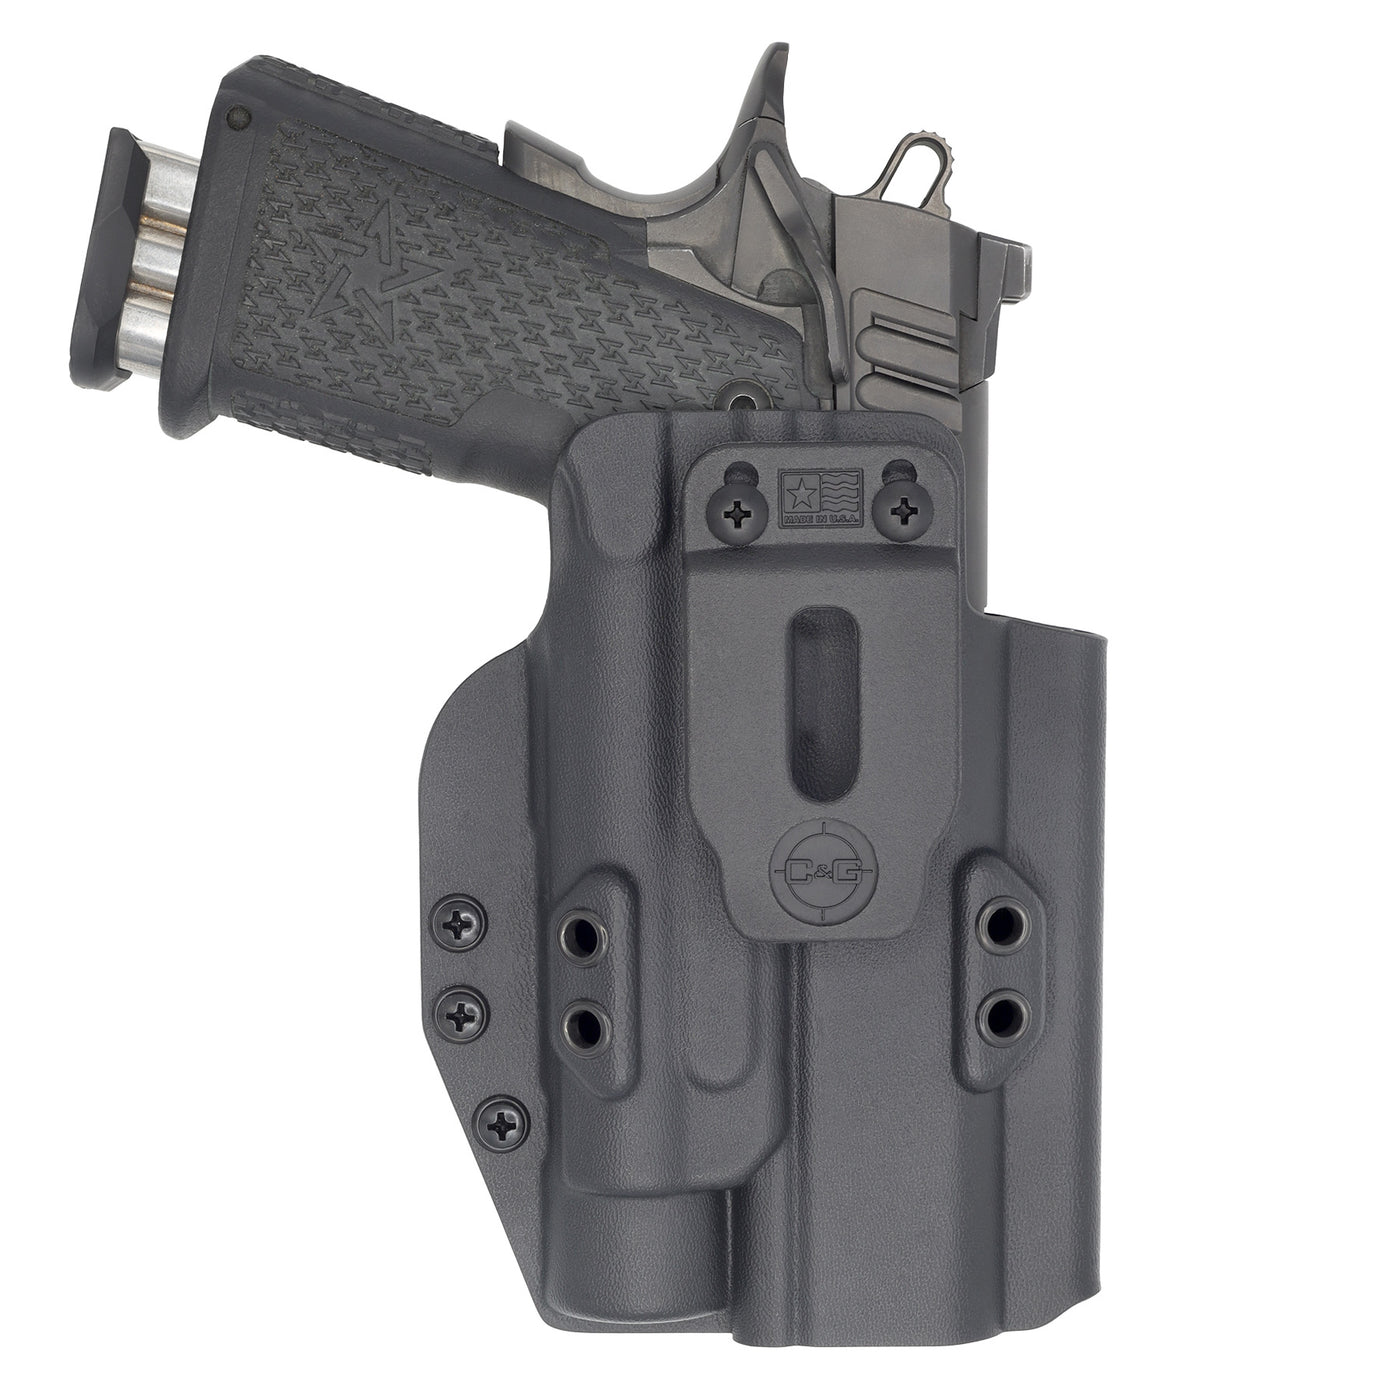 C&G holsters Quickship IWB tactical 1911/2011 Streamlight TLR-1 in holstered position